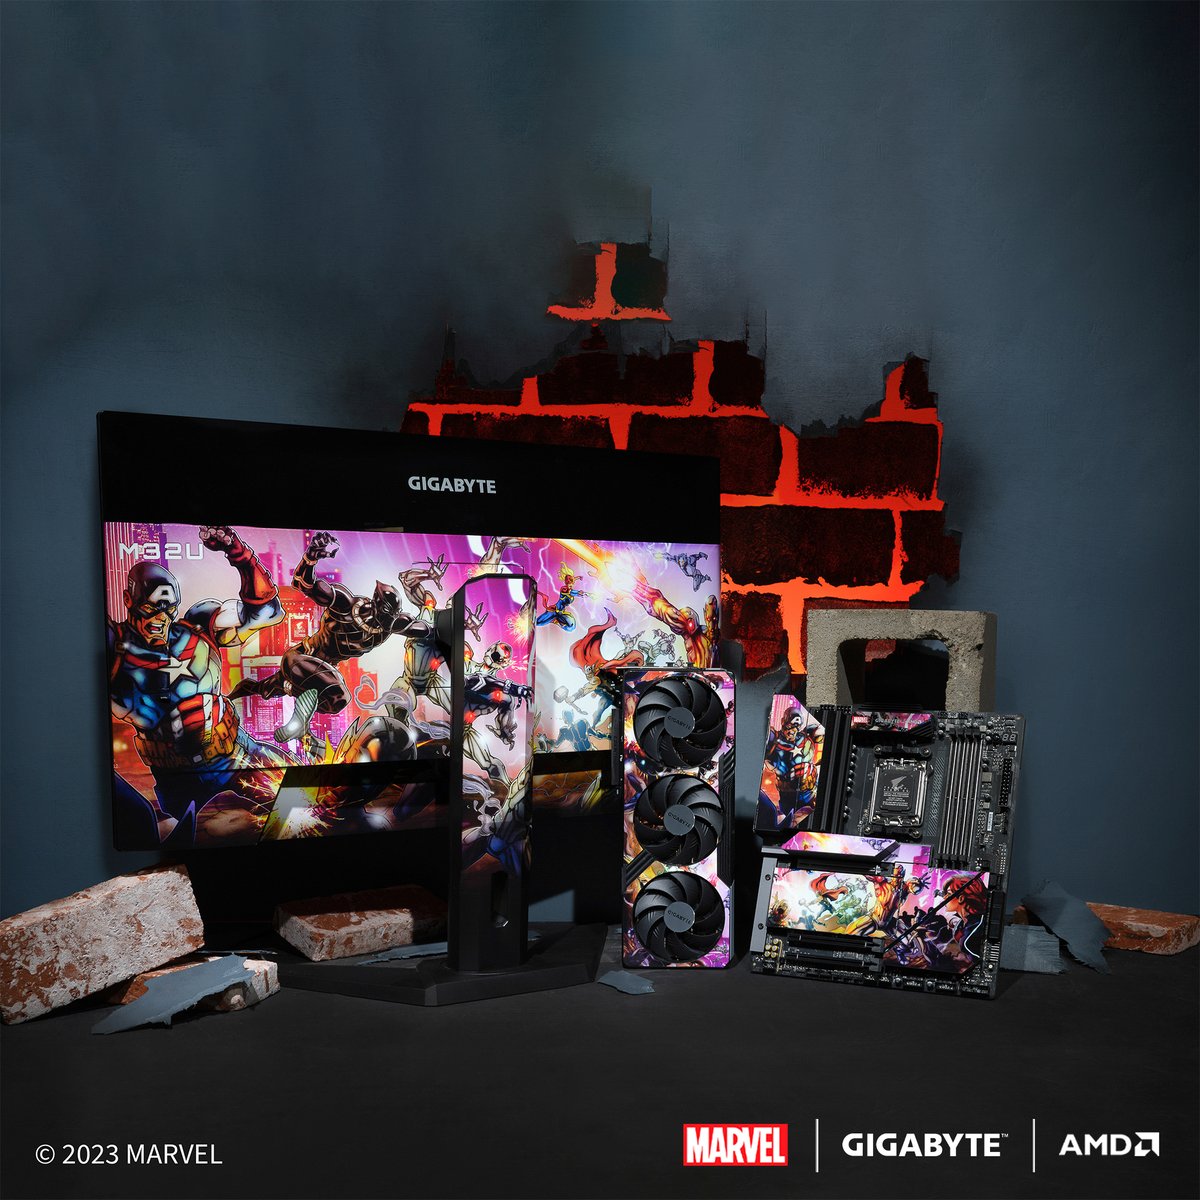 The fight with Ultron is more intellectual than physical. Can the @marvel Avengers win this? #AORUSUnleashed @AMDGaming

Enter to win this custom @amdryzen X670E motherboard, @amdradeon RX 7900 XTXgraphics card, and monitor set: gigabyte.com/us/aorus-unlea…